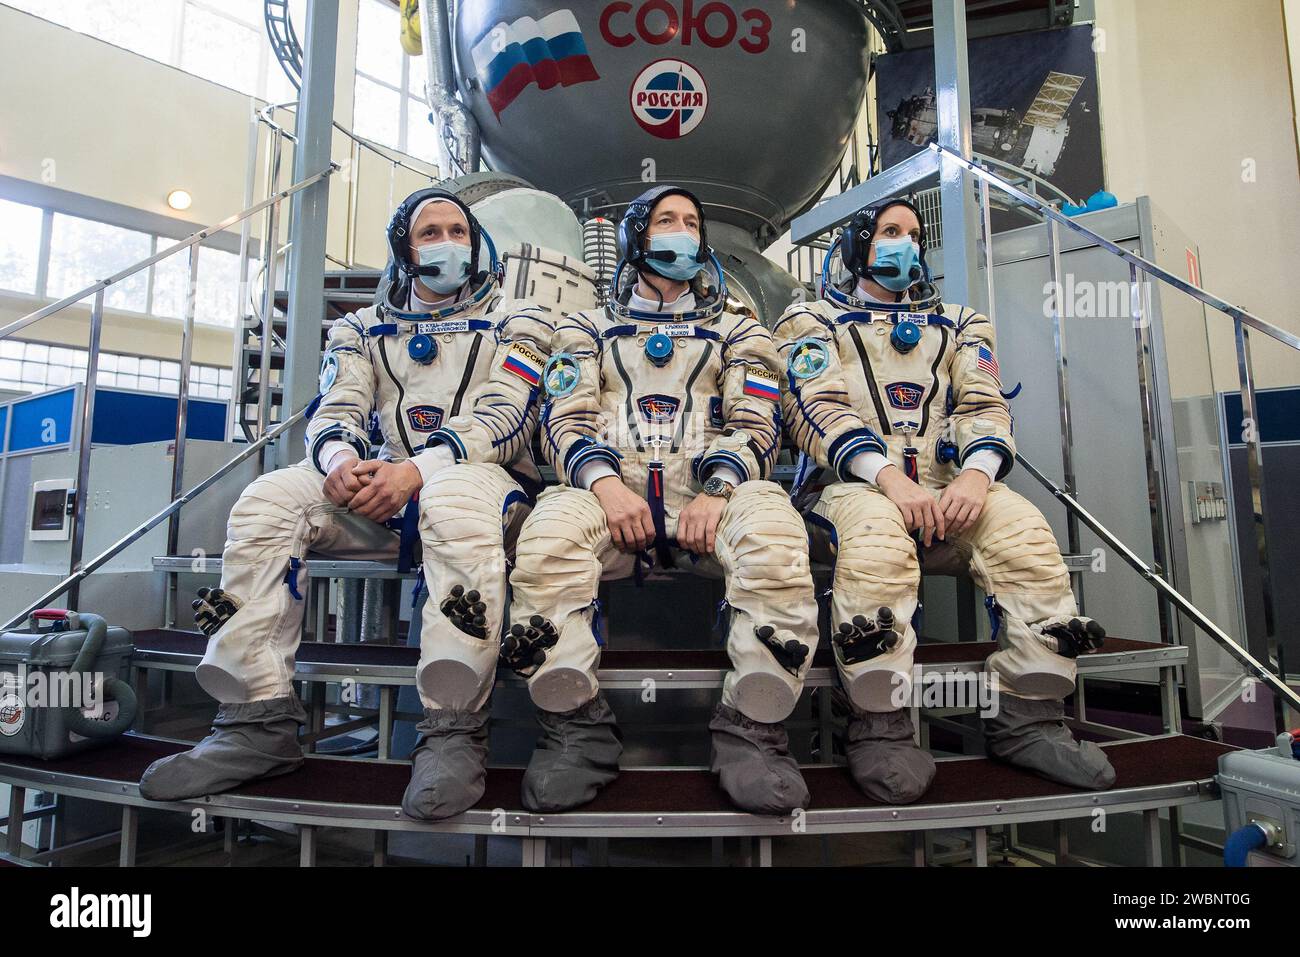 Expedition 64 crew members Russian cosmonaut Sergey Kud-Sverchkov of Roscosmos, left, Russian cosmonaut Sergey Ryzhikov of Roscosmos, center, and NASA astronaut Kate Rubins, pose for a photo during Soyuz qualification exams, Wednesday, Sept. 23, 2020 at the Gagarin Cosmonaut Training Center (GCTC) in Star City, Russia, in advance of their scheduled launch October 14 from Baikonur Cosmodrome in Kazakhstan to the International Space Station. Stock Photo